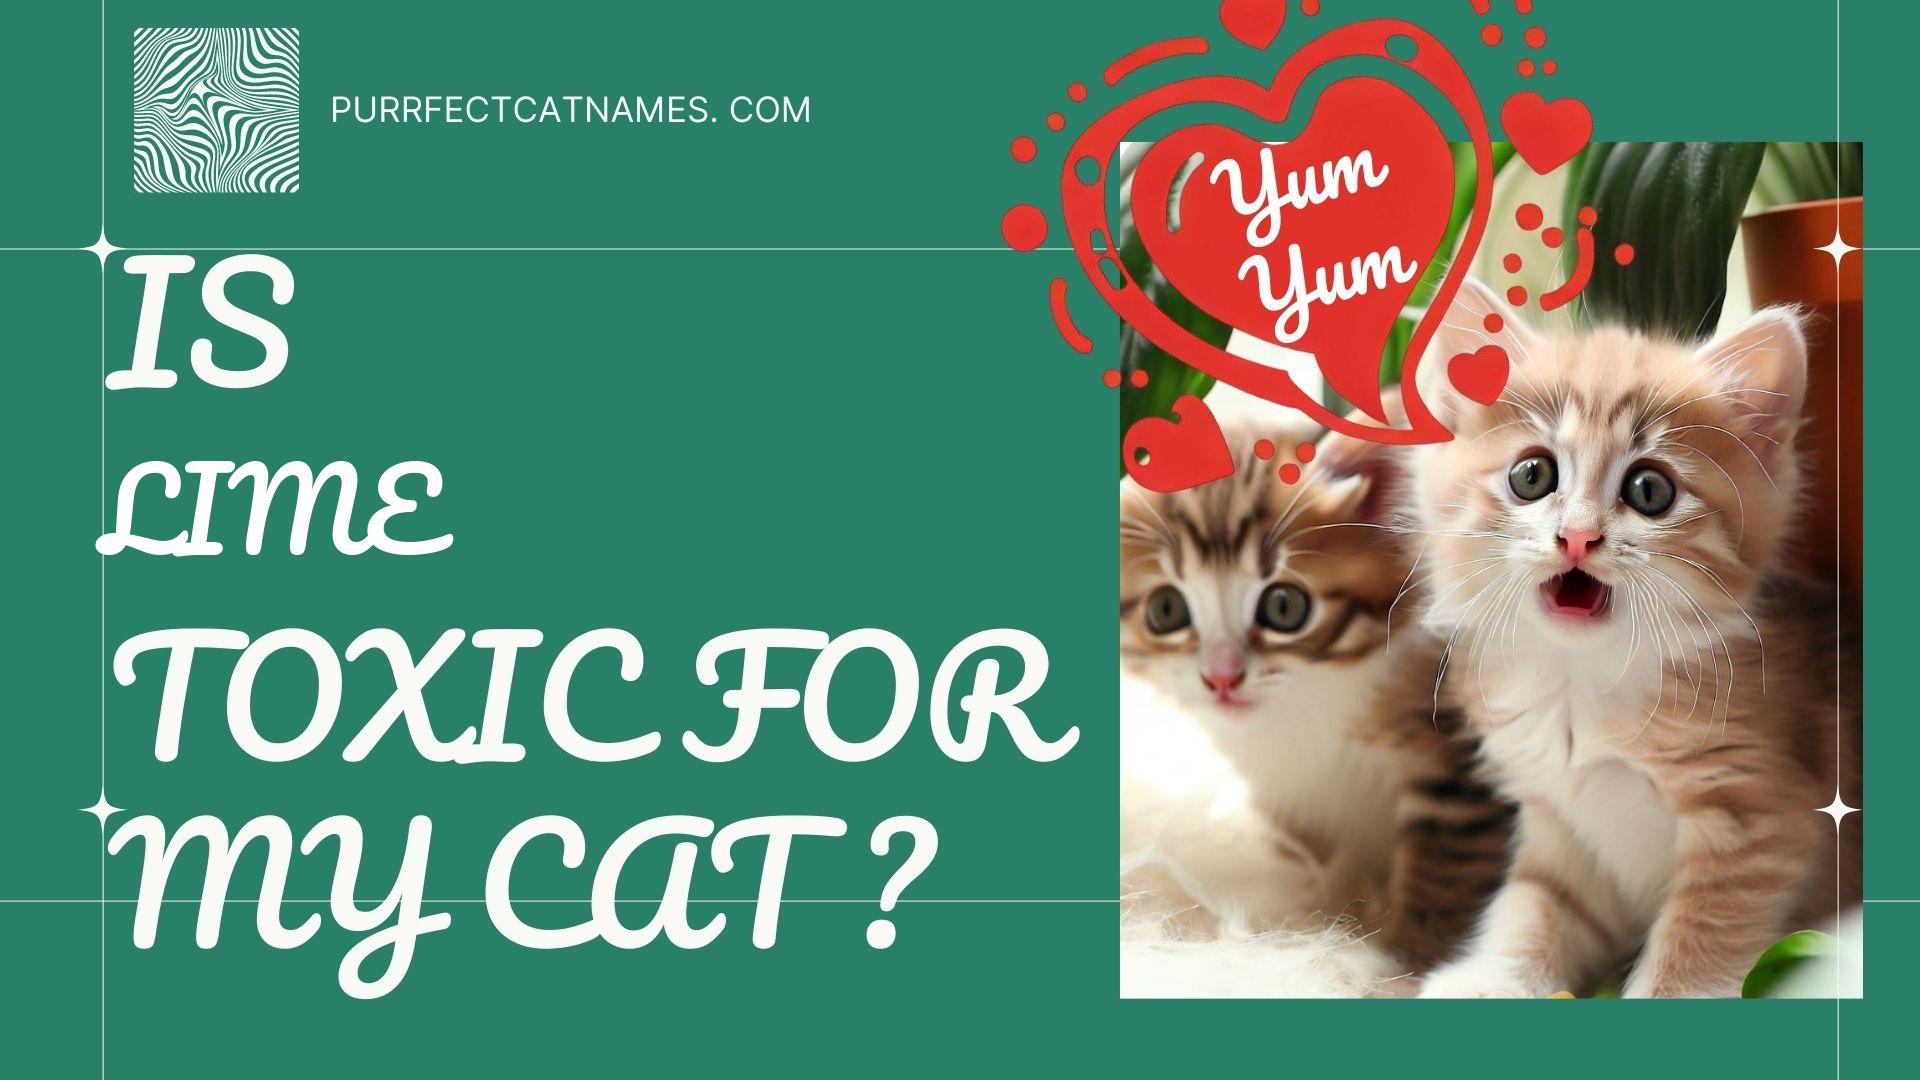 IsLime plant toxic for your cat